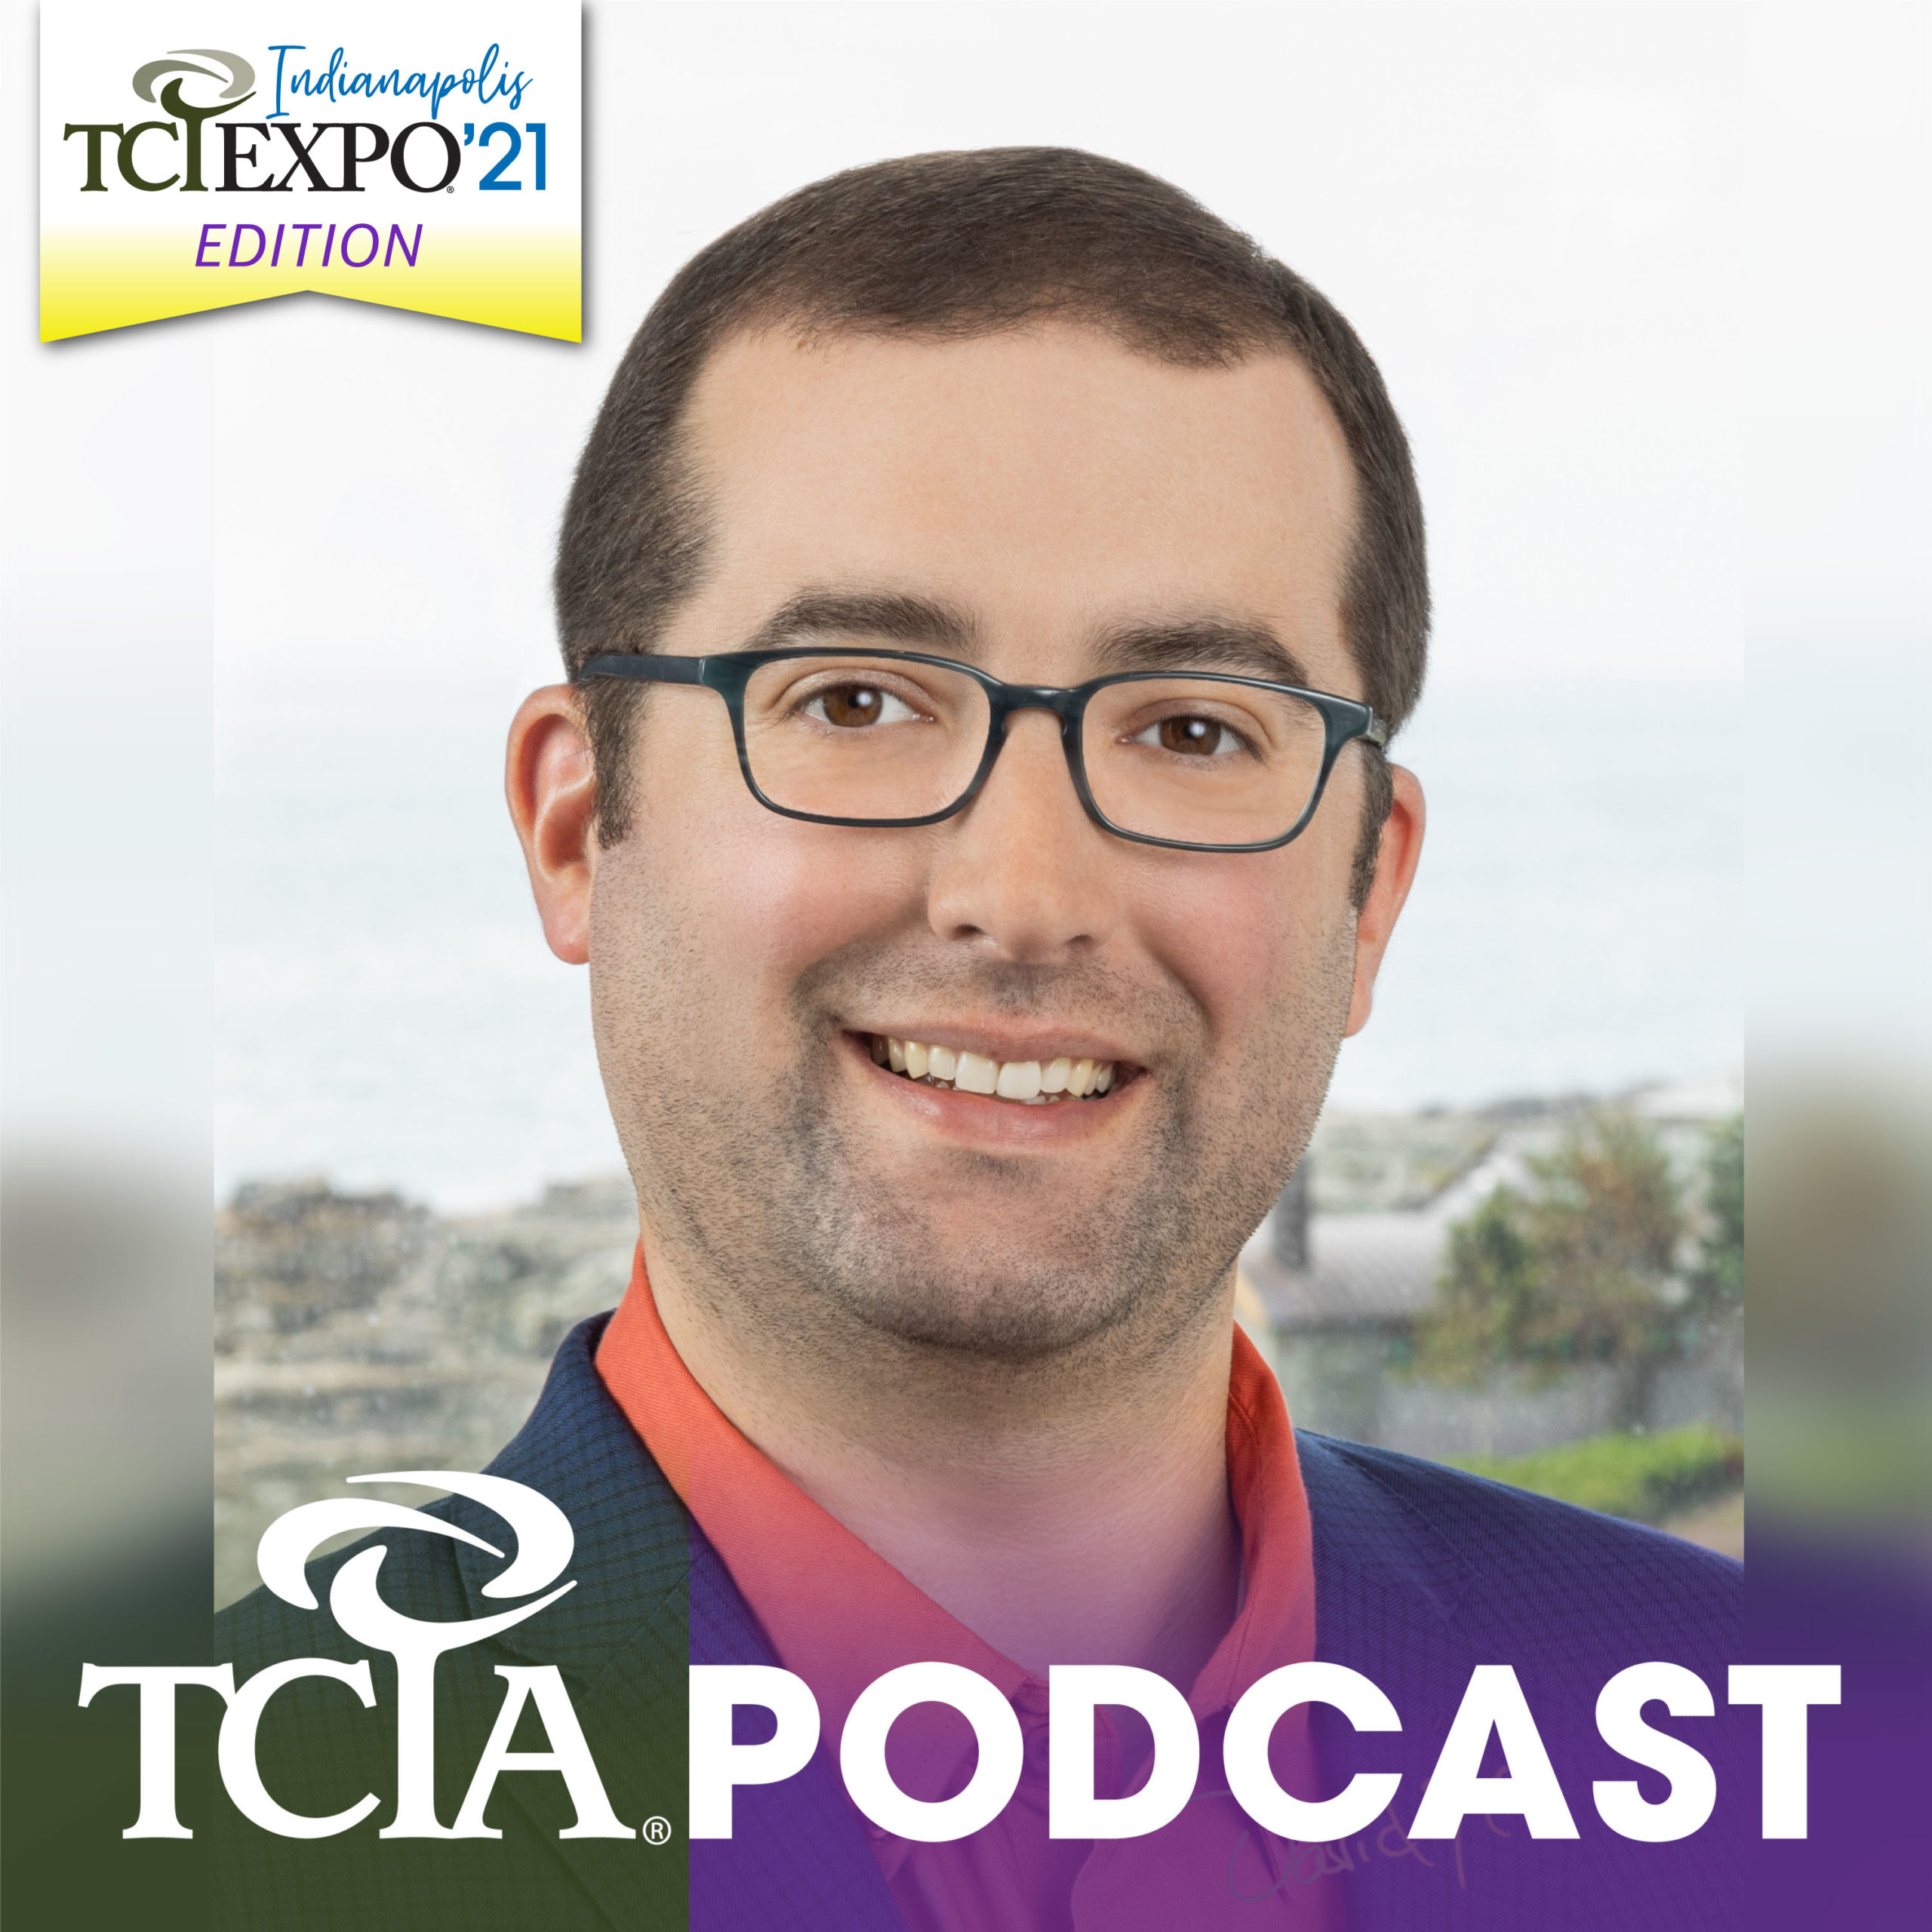 TCI EXPO 2021: Experiencing EXPO with David White